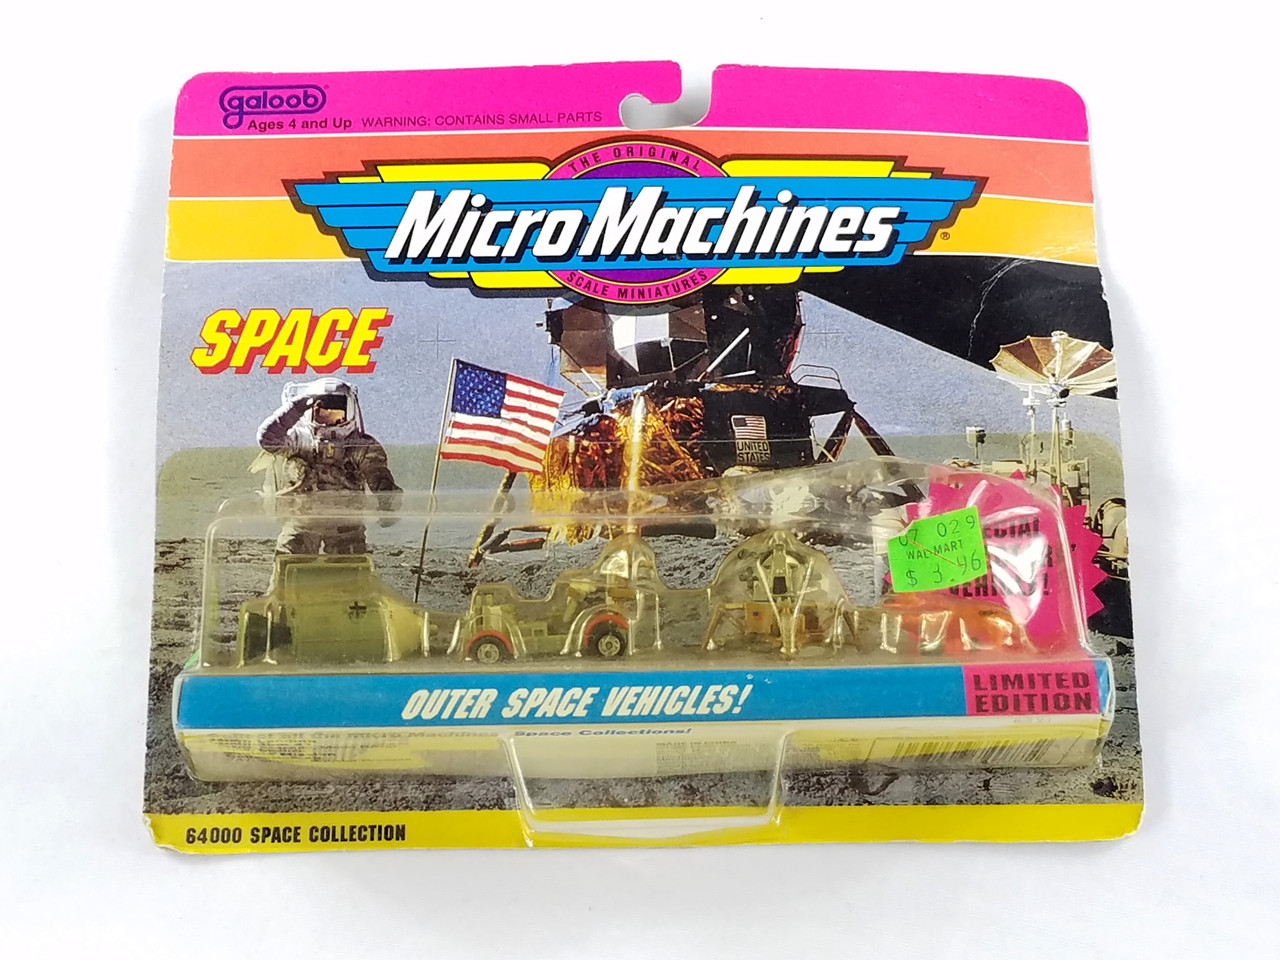 Outer Space Limited Edition Galoob New in Box Micro Machines